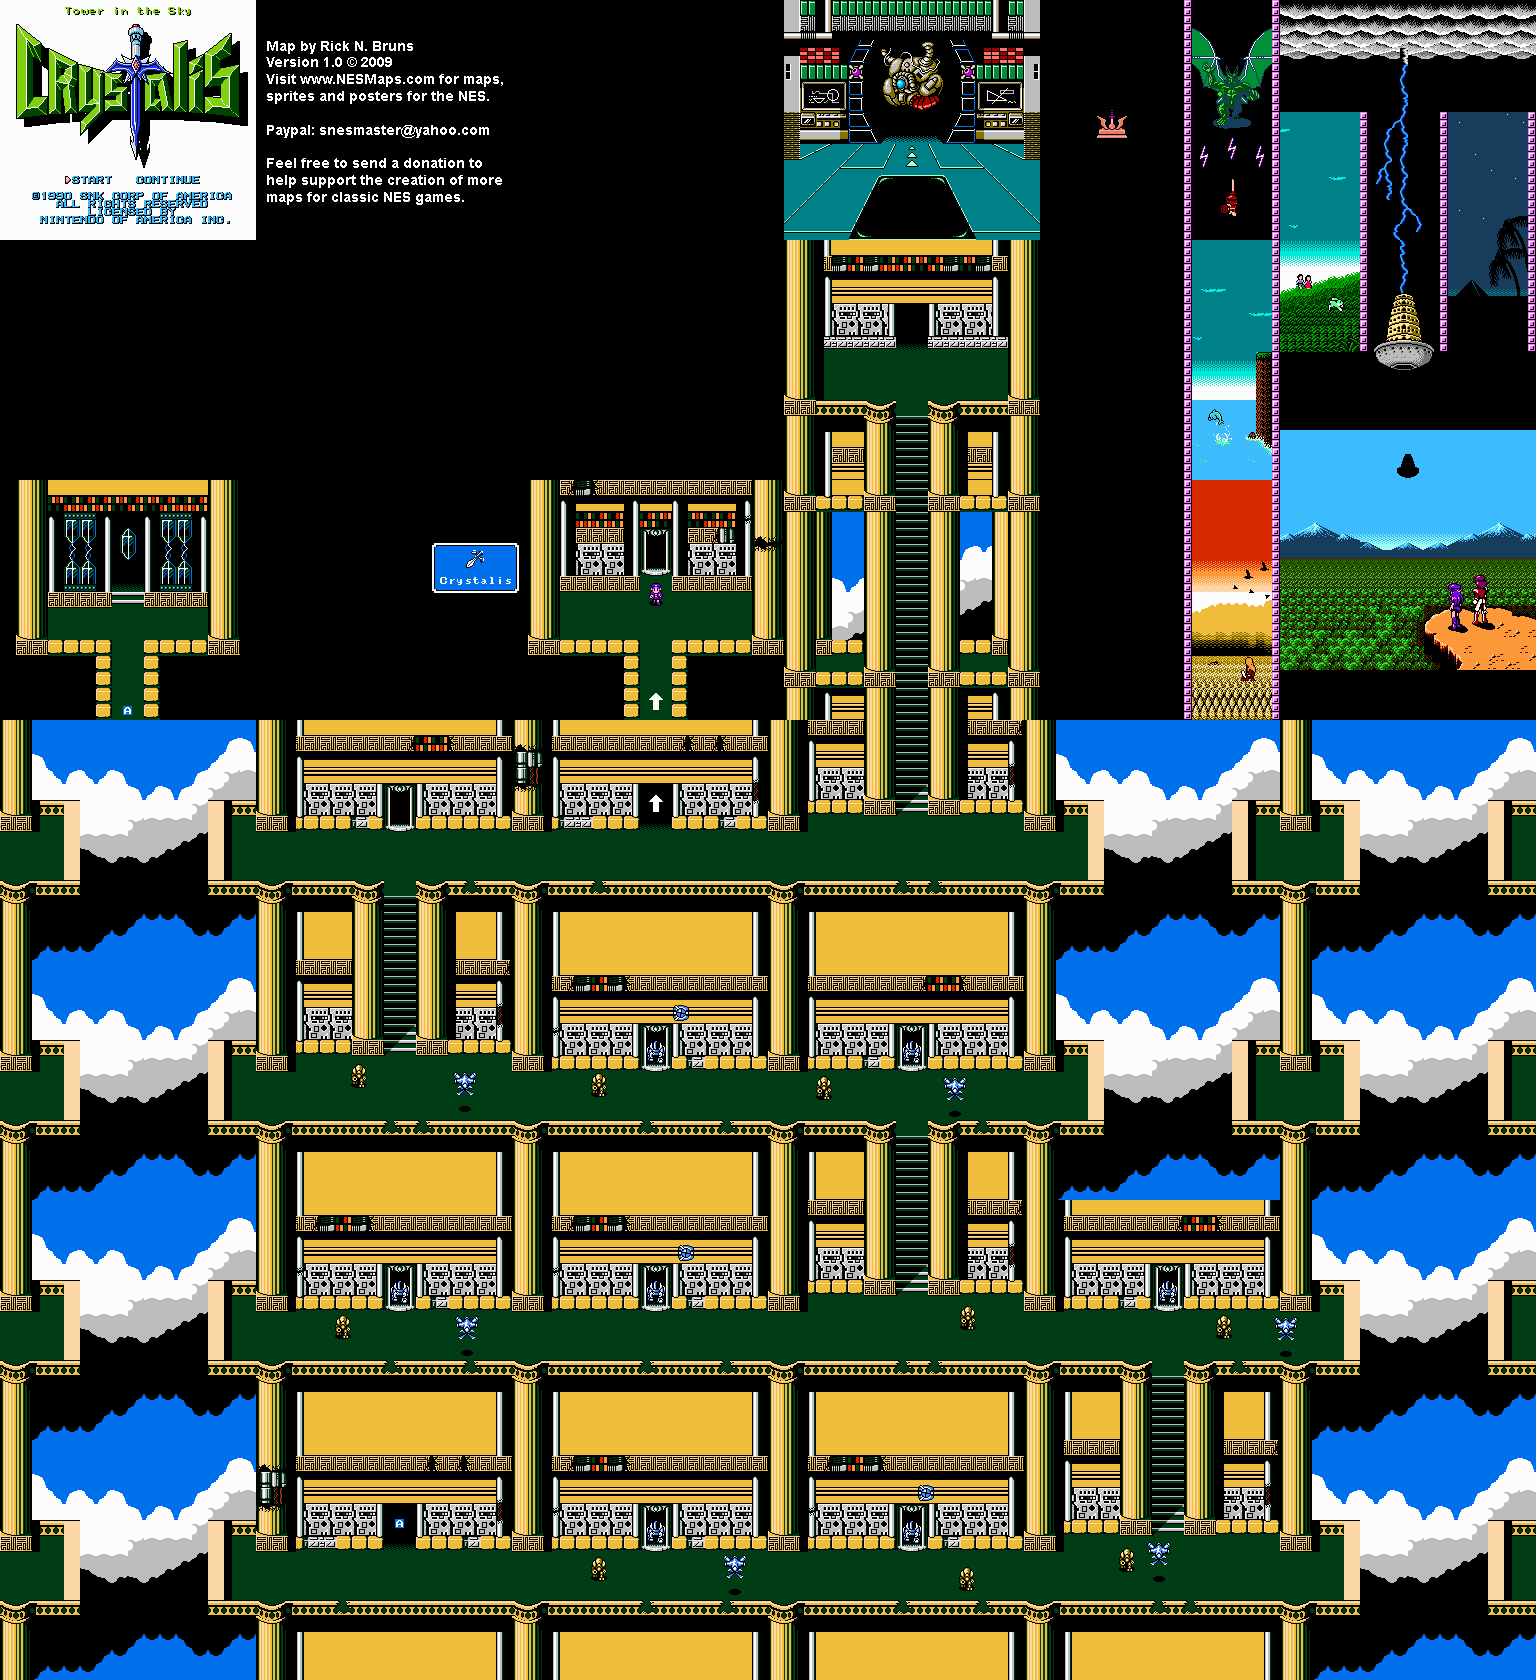 Crystalis - Tower in the Sky Nintendo NES Map